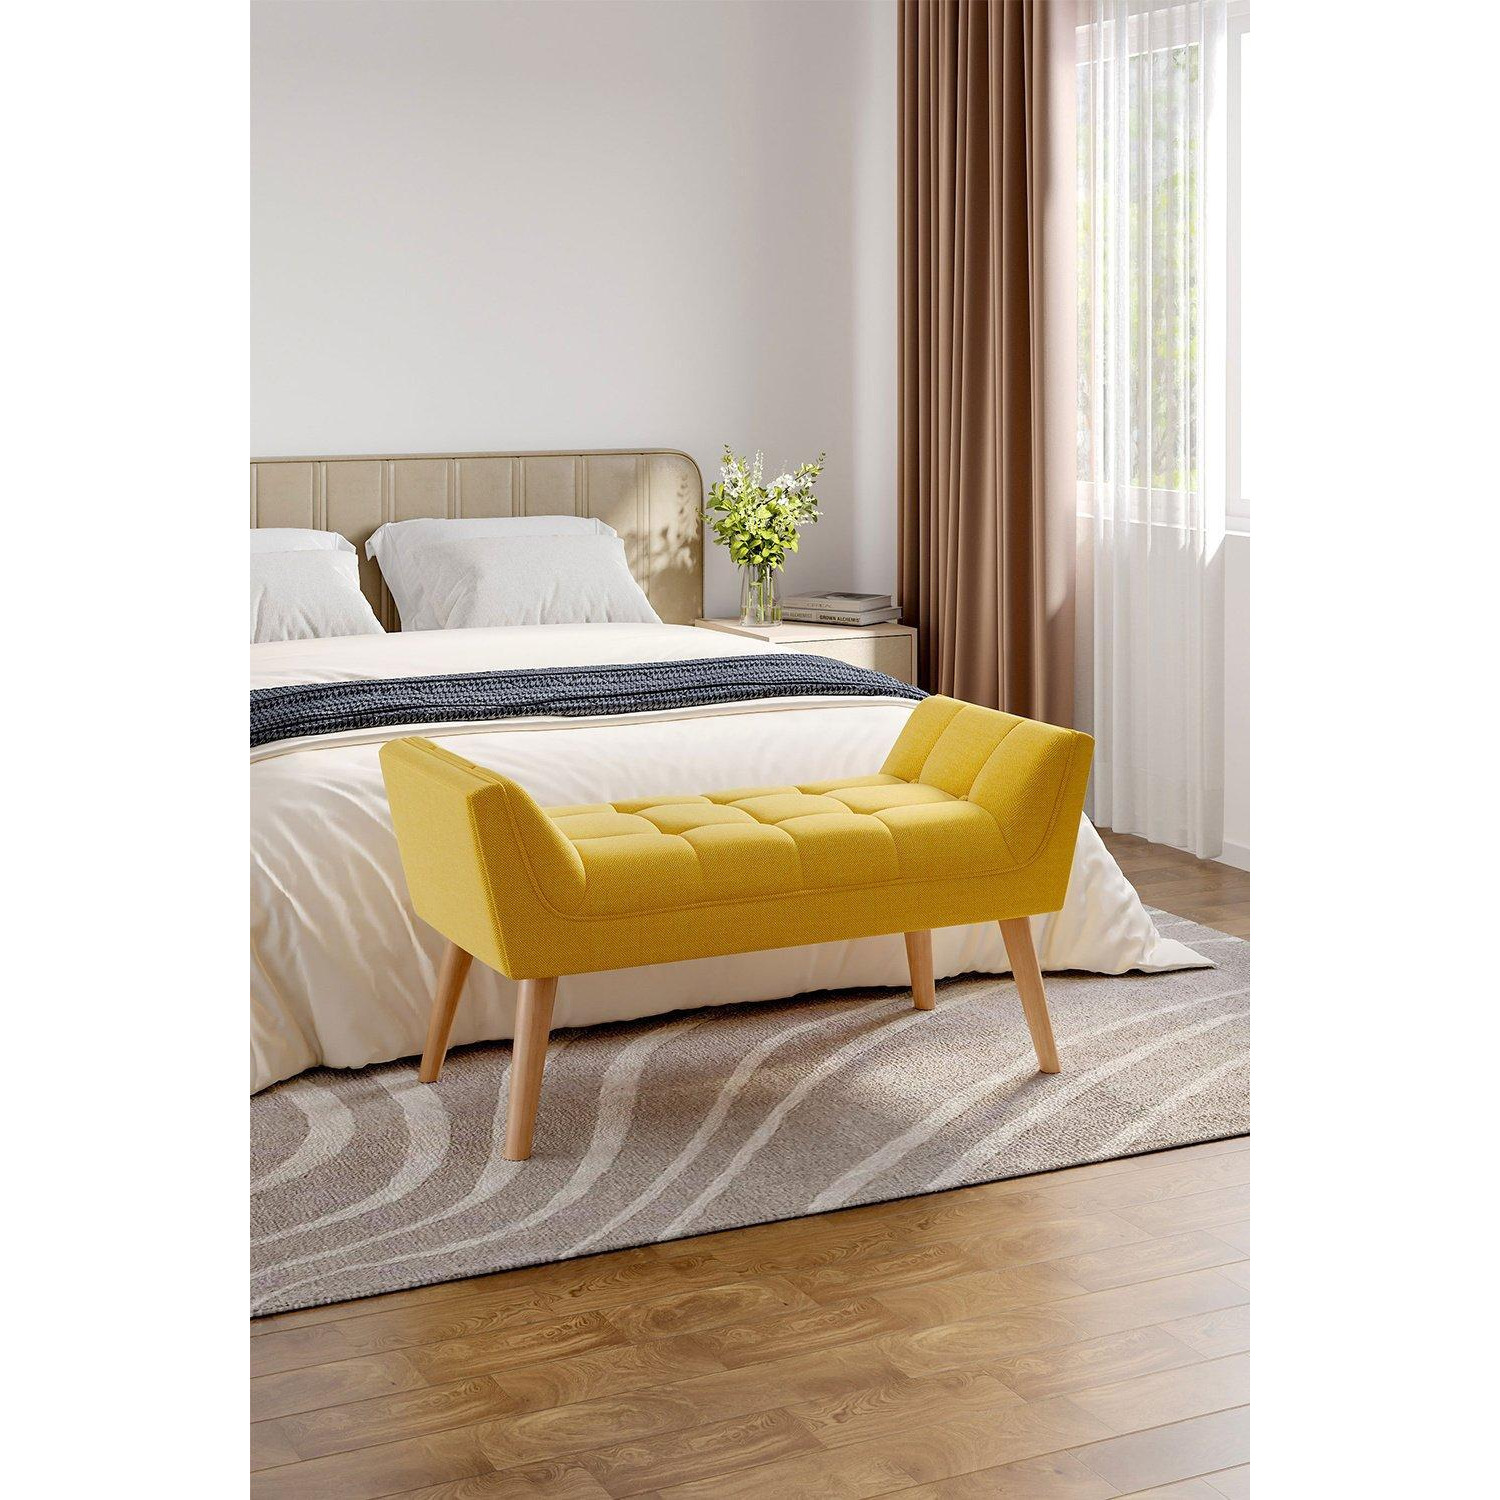 Tufted Fabric Bed Bench Upholstered Footstool - image 1